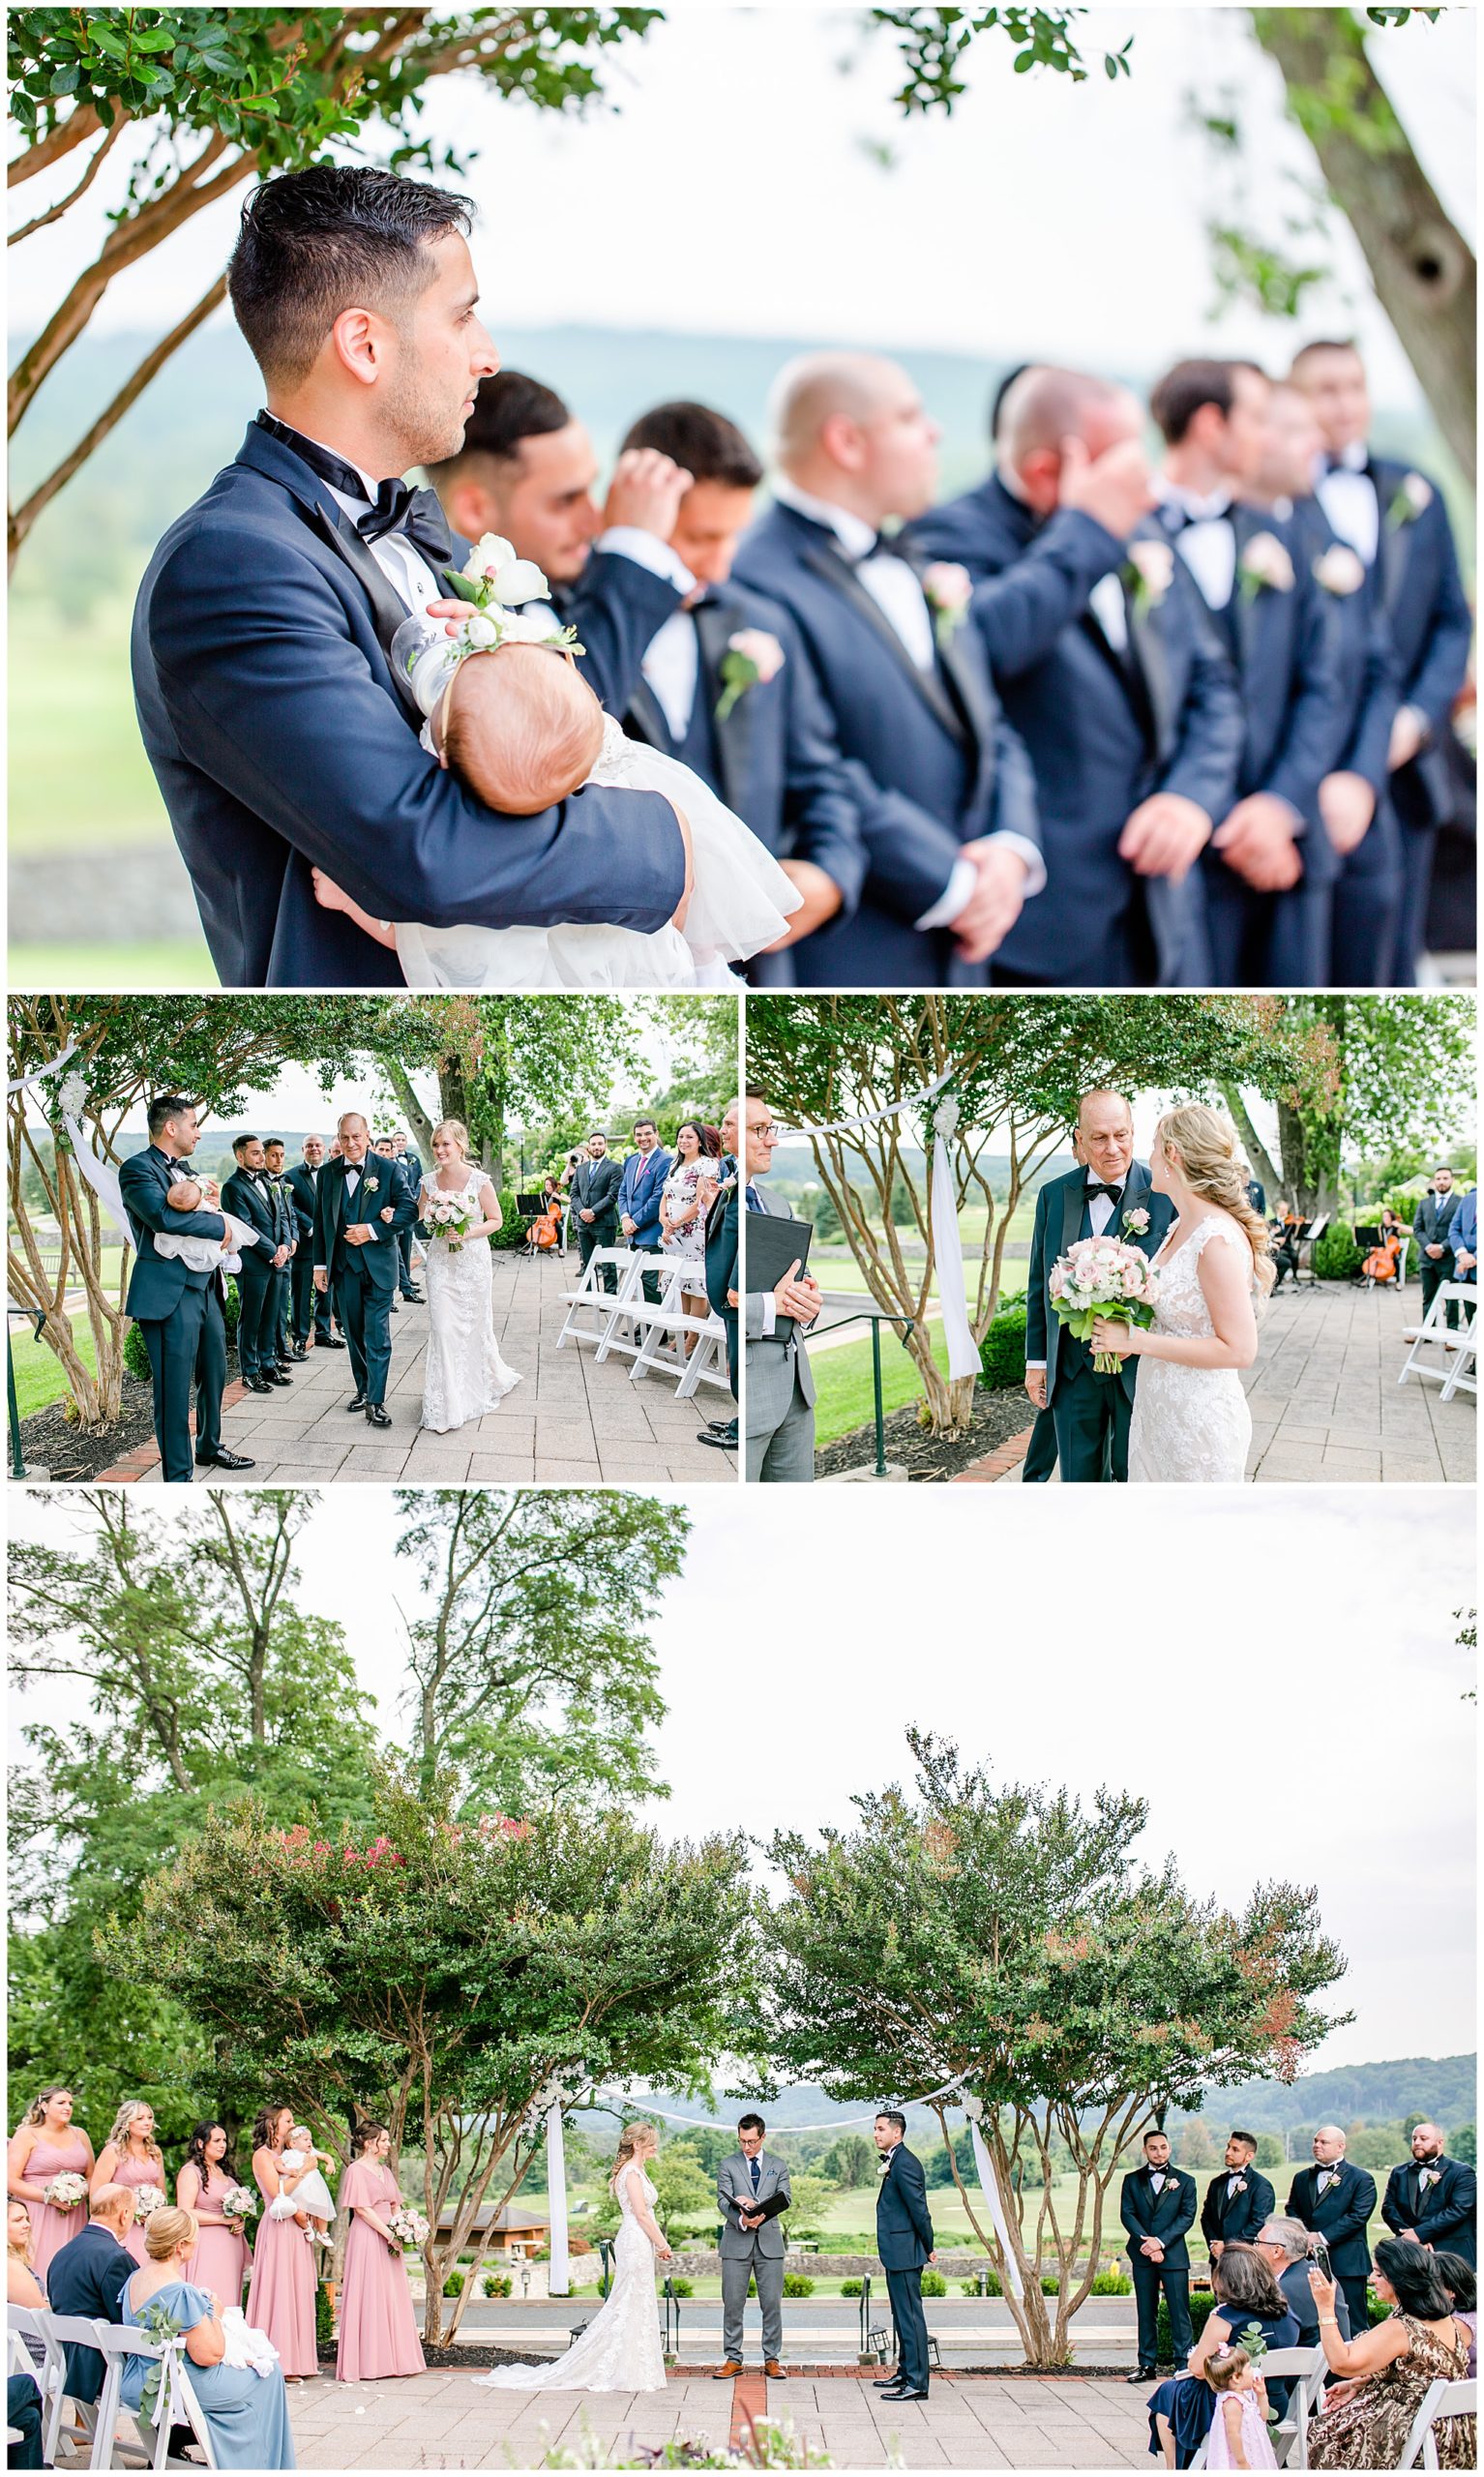 mid-summer Hayfields Country Club, Hunt Valley wedding, Baltimore wedding photographer, Rachel E.H. Photography, DC wedding photographer, summer wedding, pink and navy aesthetic, Washington DC wedding photography, Baltimore wedding photography, wedding processional